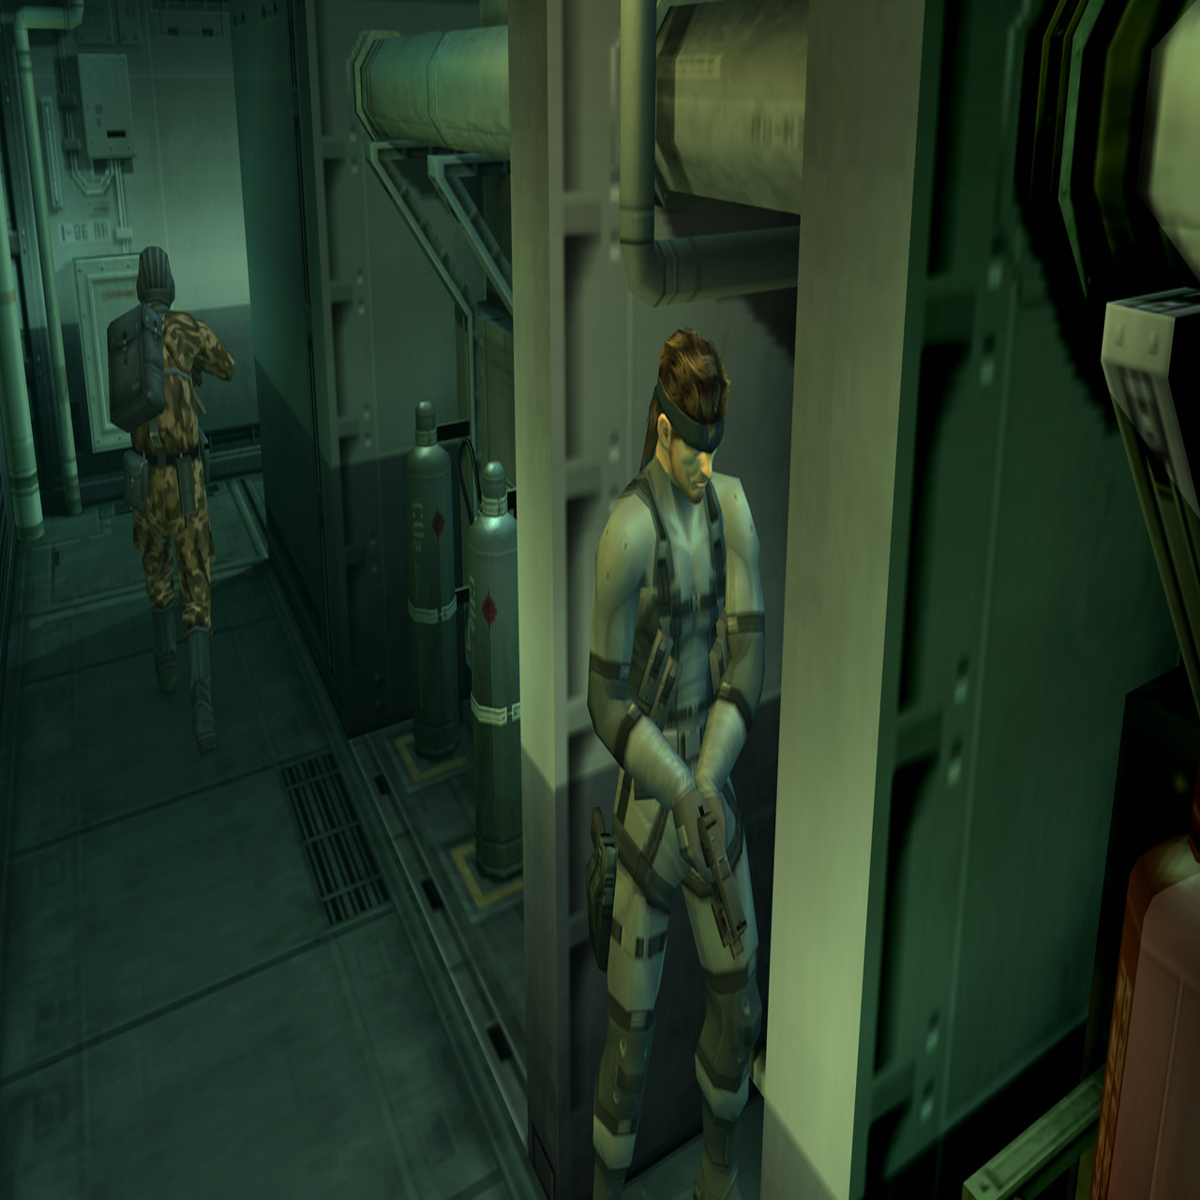 Metal Gear Solid 1, 2, And 3 Are Coming To PlayStation 5 - Game